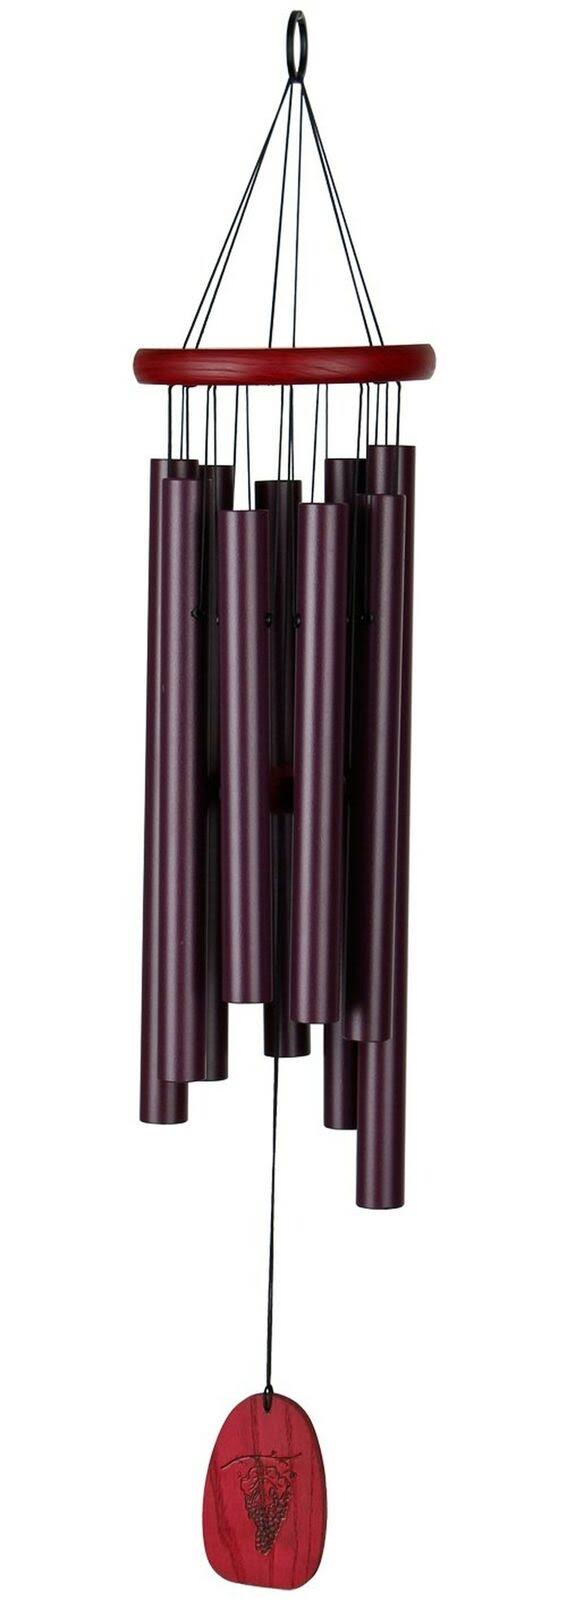 Woodstock Tuscany Wind Chime - Brown, 27"